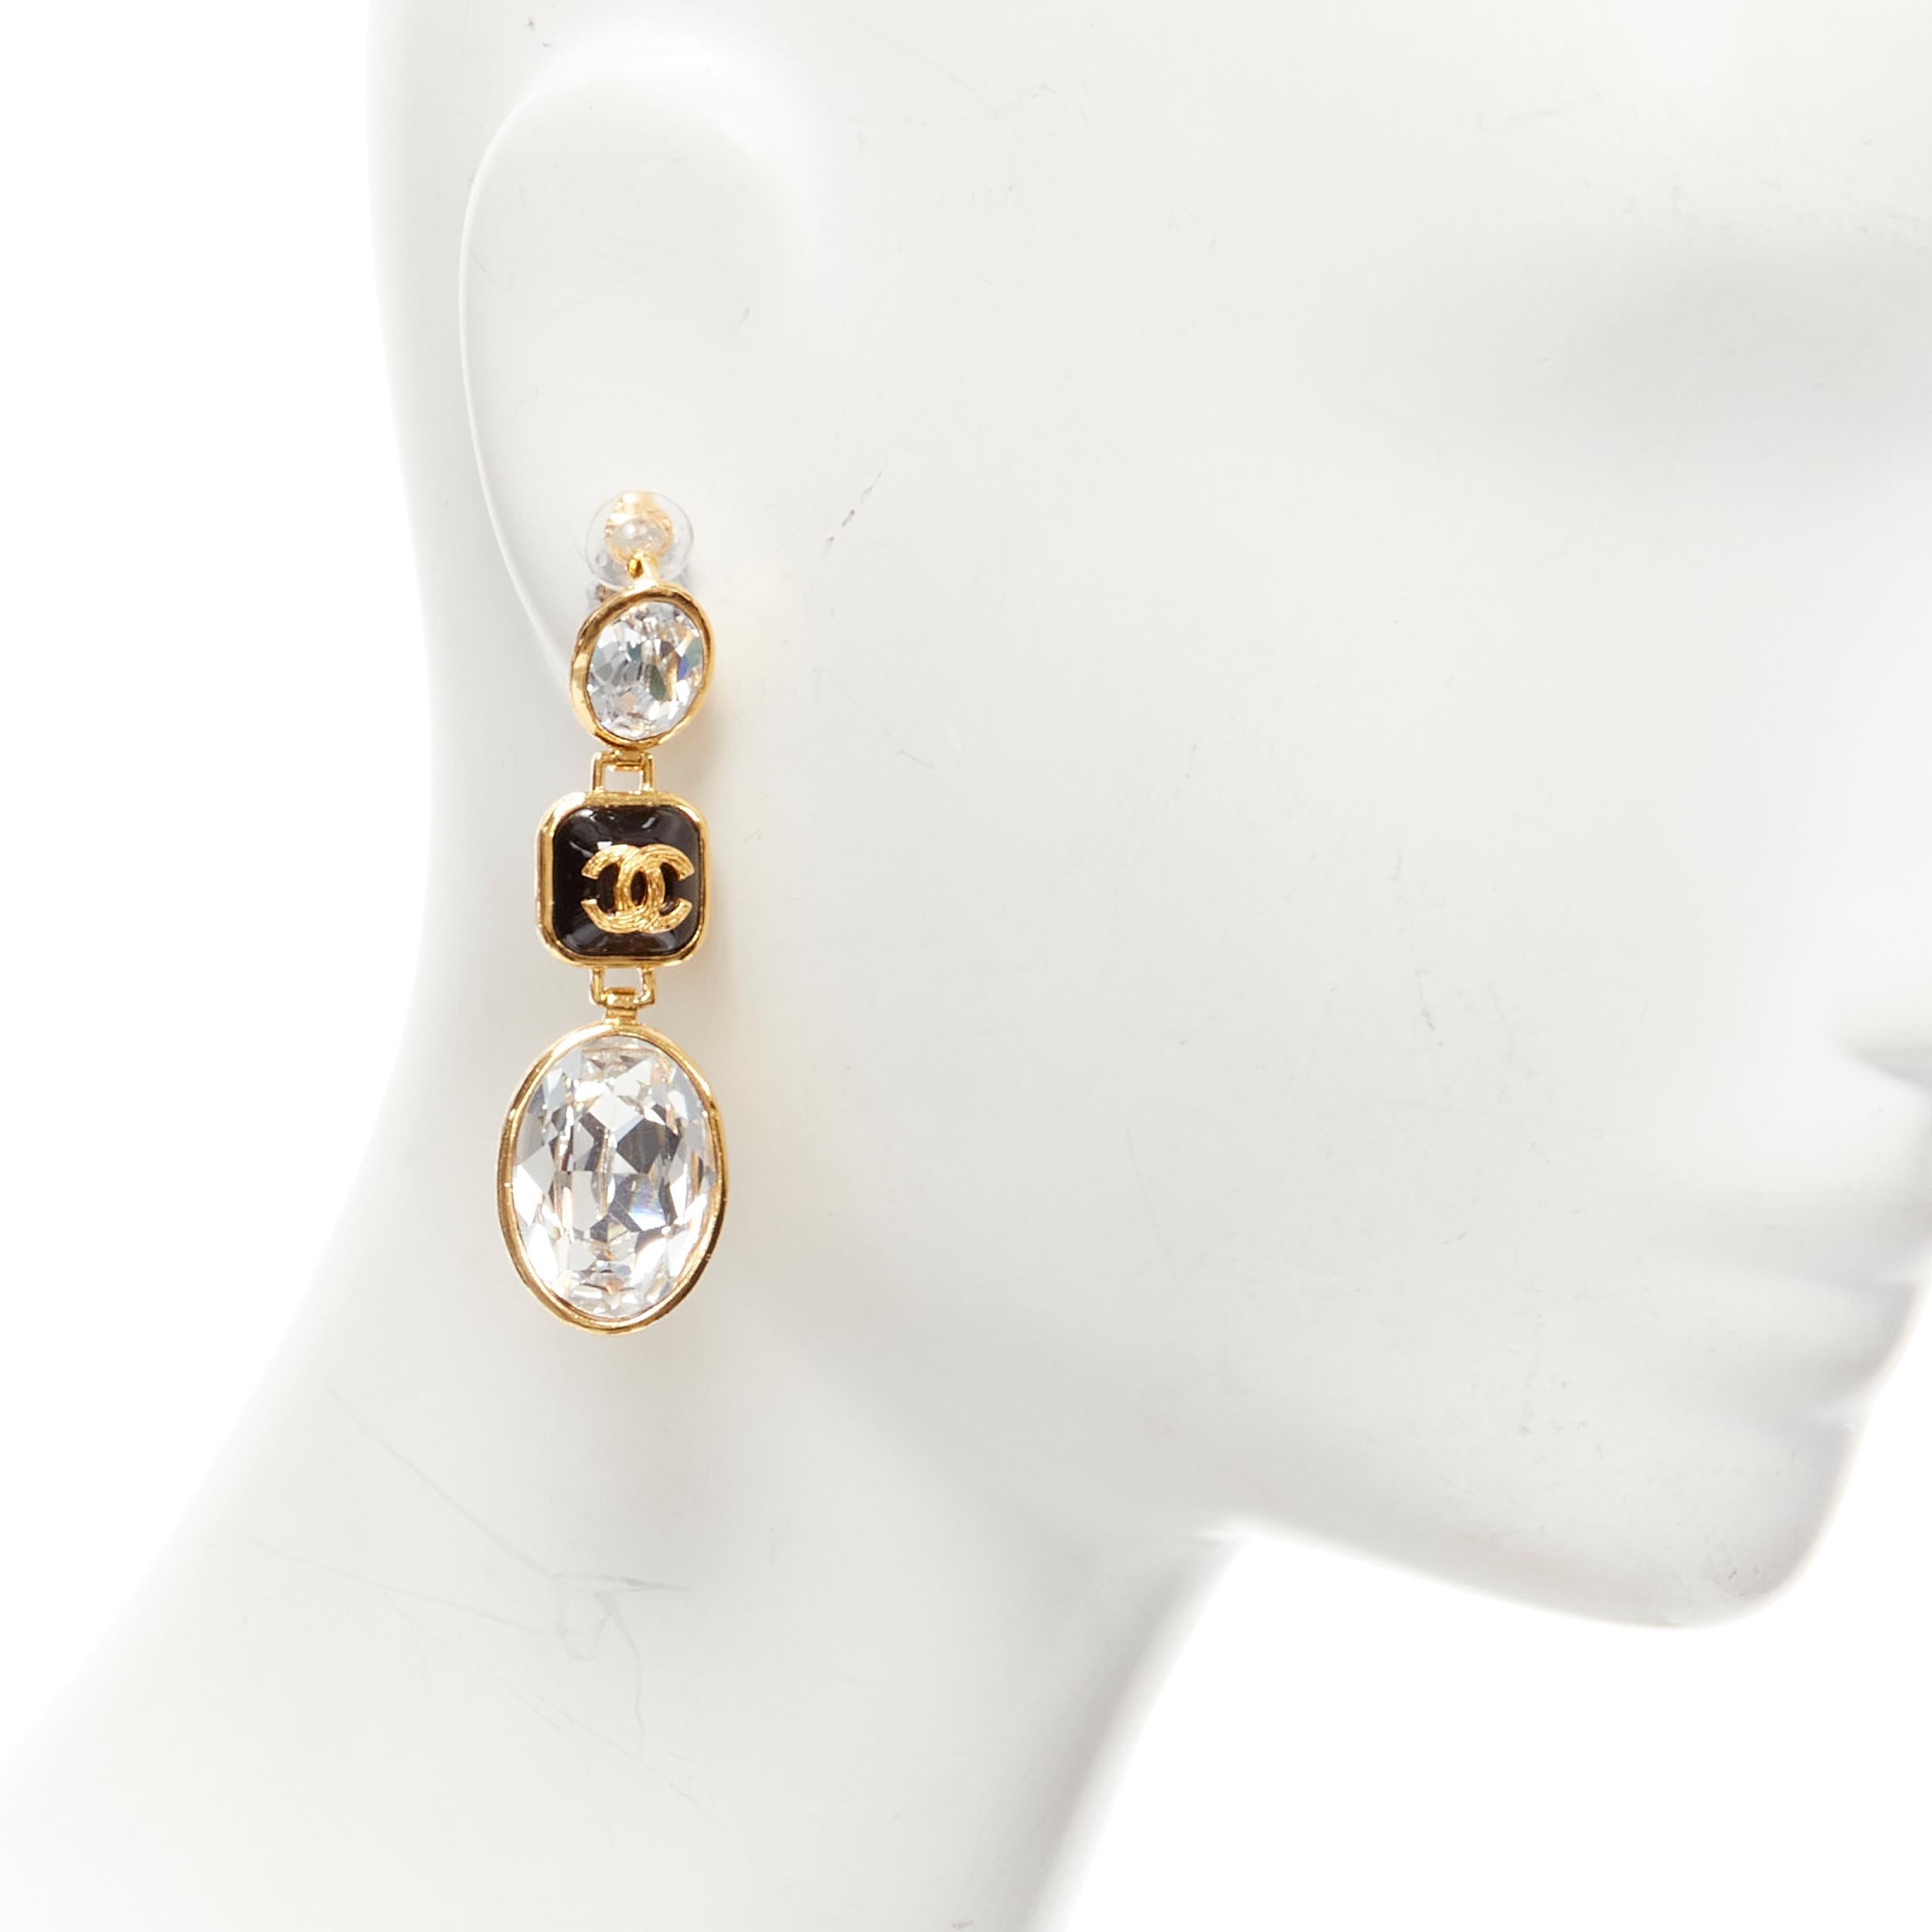 CHANEL G21 V CC logo black resin crystal gold tone statement drop earrings
Reference: TGAS/C01557
Brand: Chanel
Designer: Virginie Viard
Material: Metal, Resin
Color: Gold, Black
Pattern: Solid
Closure: Clip On
Extra Details: Clip on closure.
Made